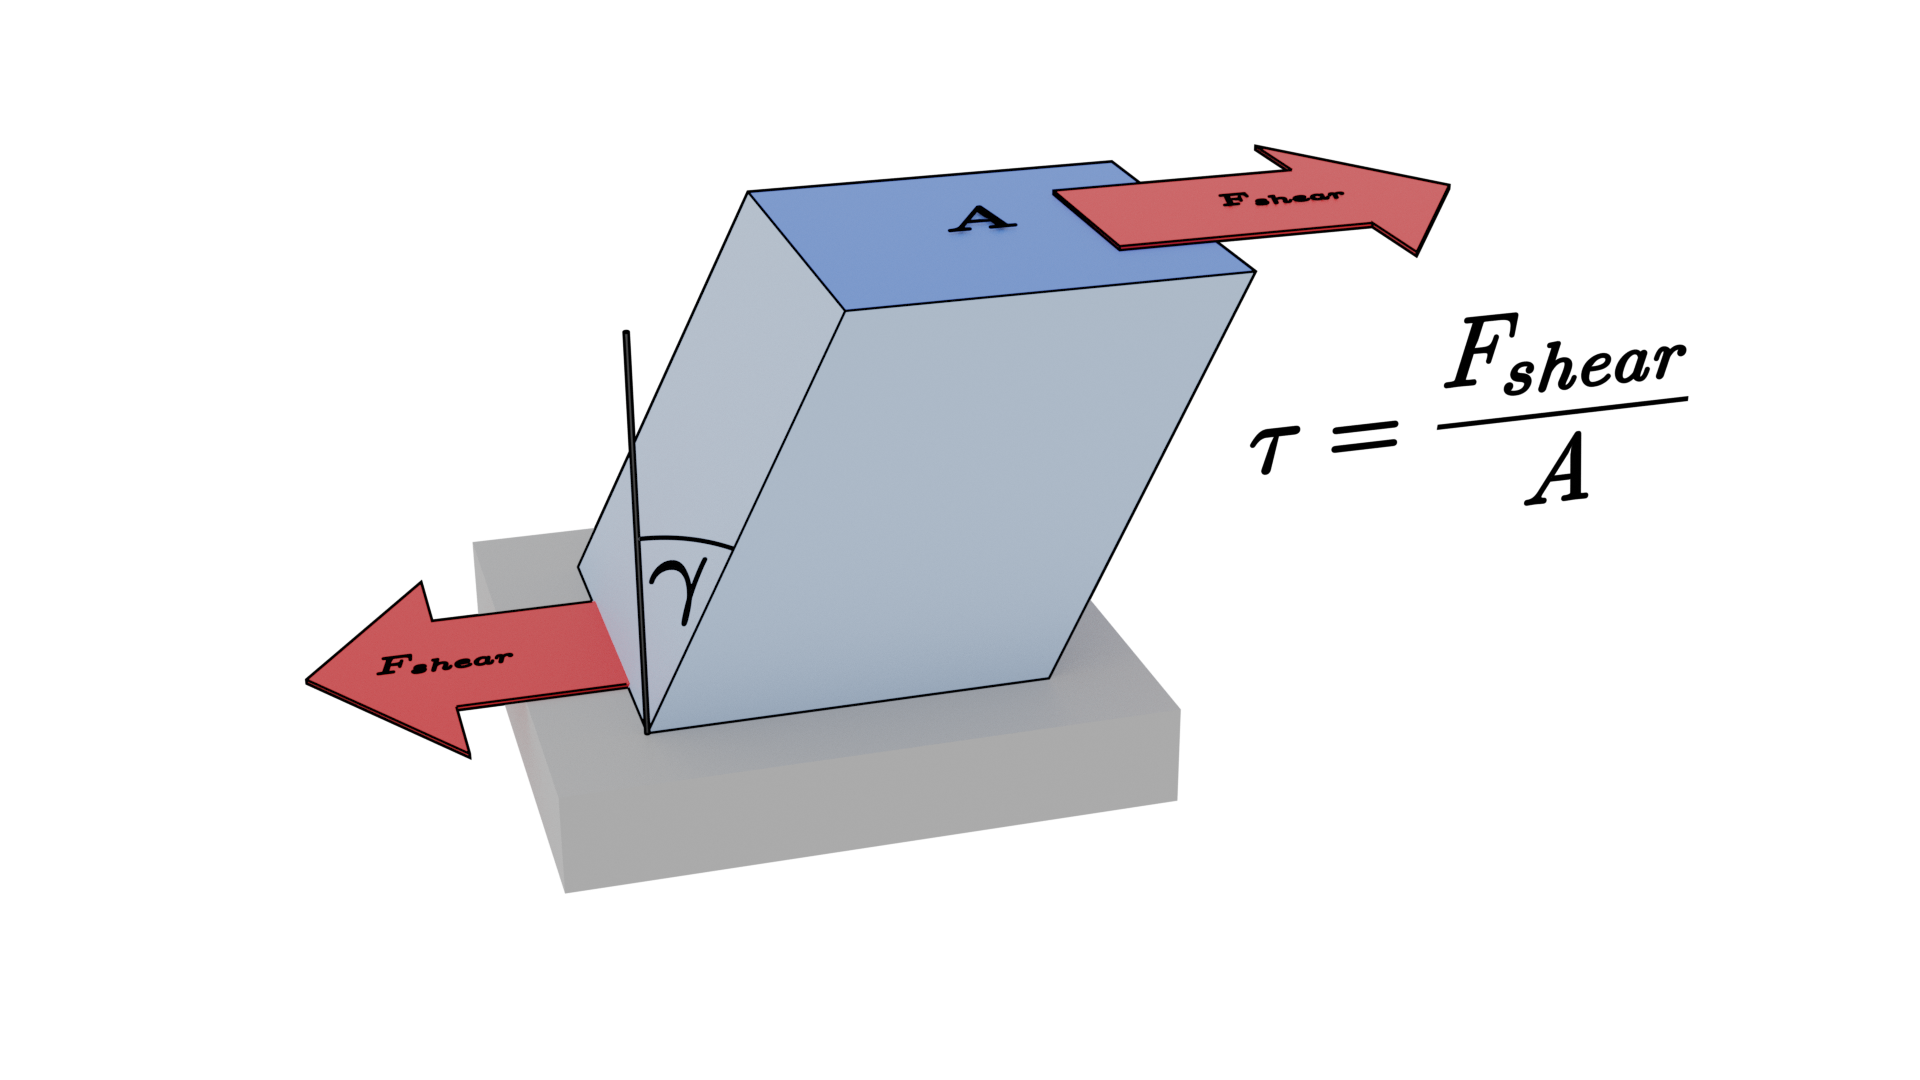 a shear force acting on a body